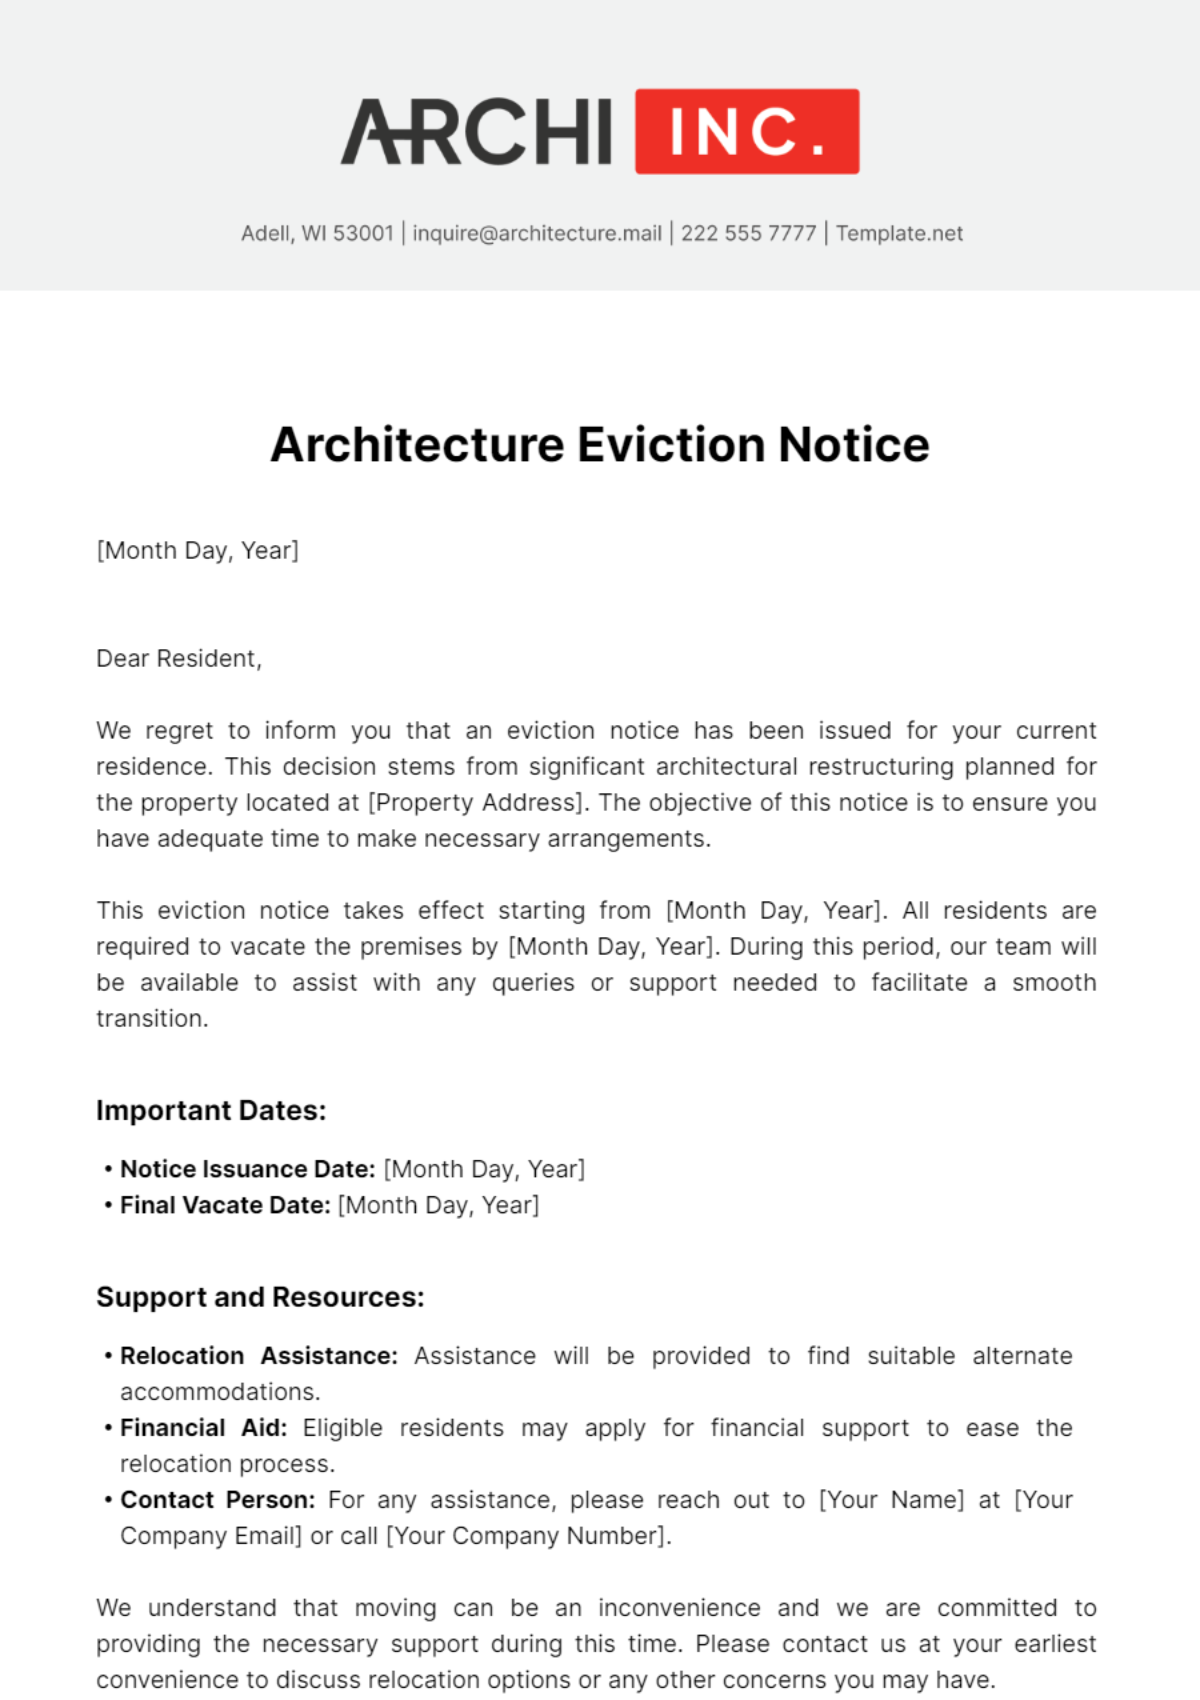 Free Architecture Eviction Notice Template